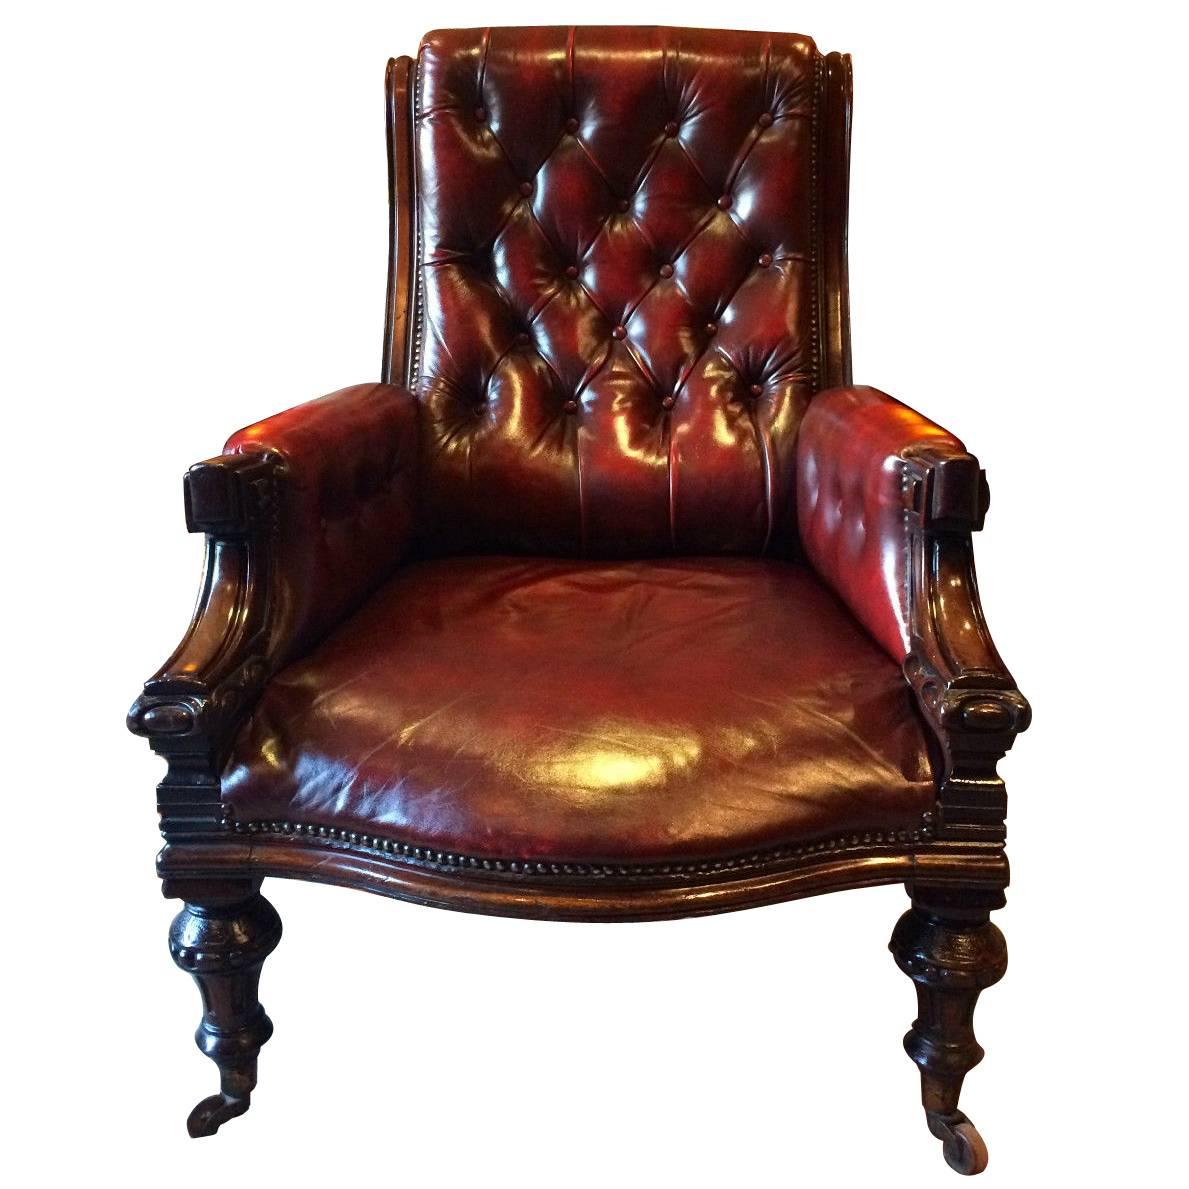 Antique Victorian Leather Button-Back Armchair Mahogany, 19th Century